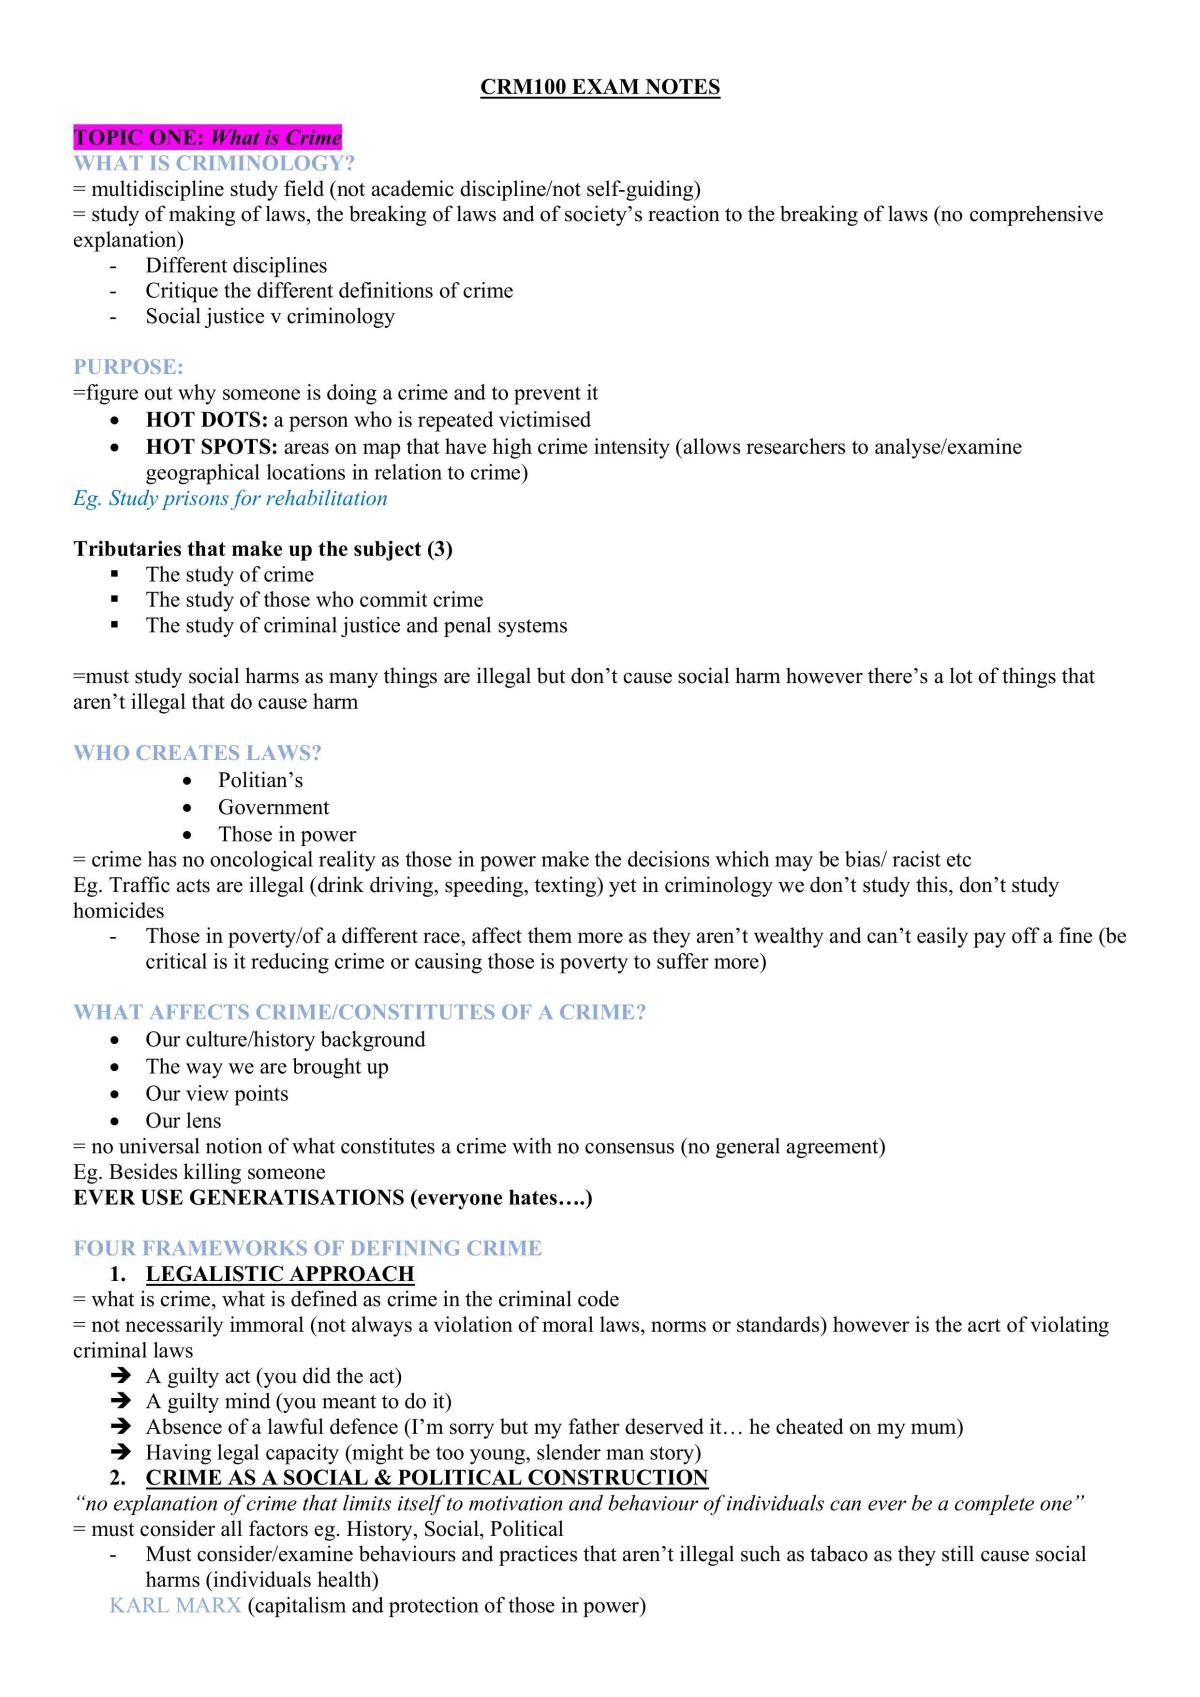 CRM100 Exam Notes - Page 1